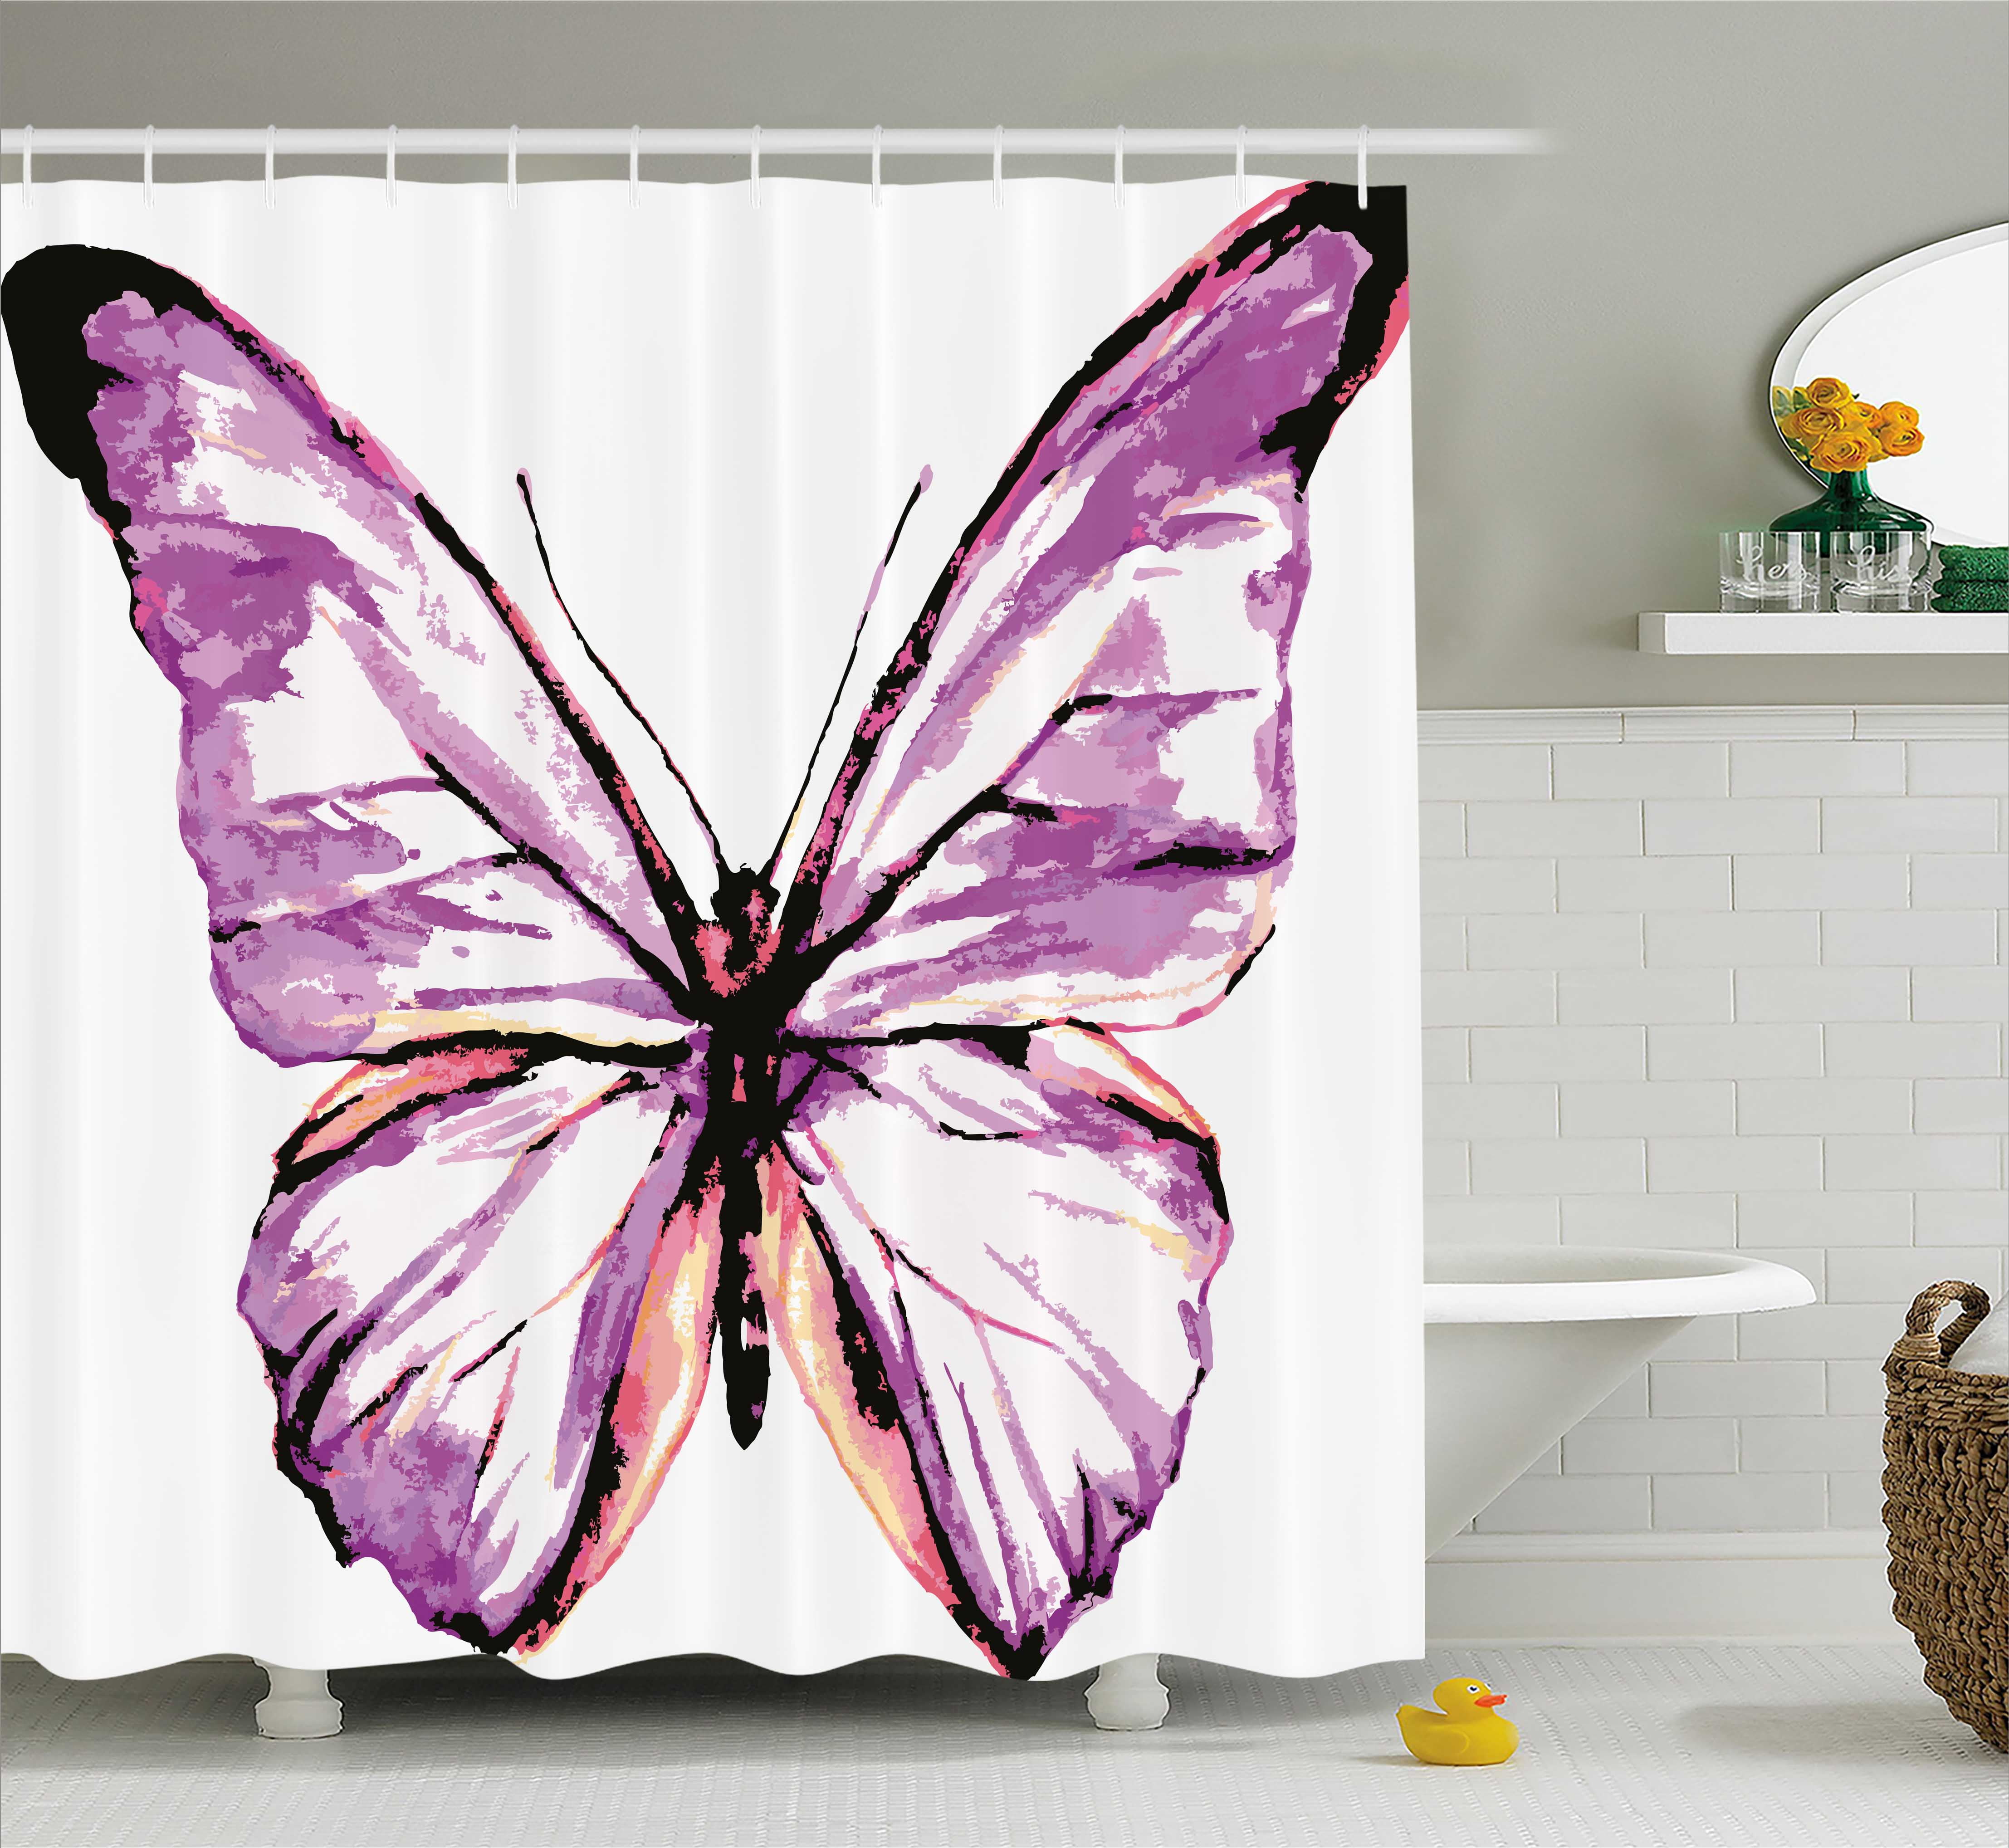 Animal Shower Curtain, Artistic Butterfly Design in Watercolors Wings ...